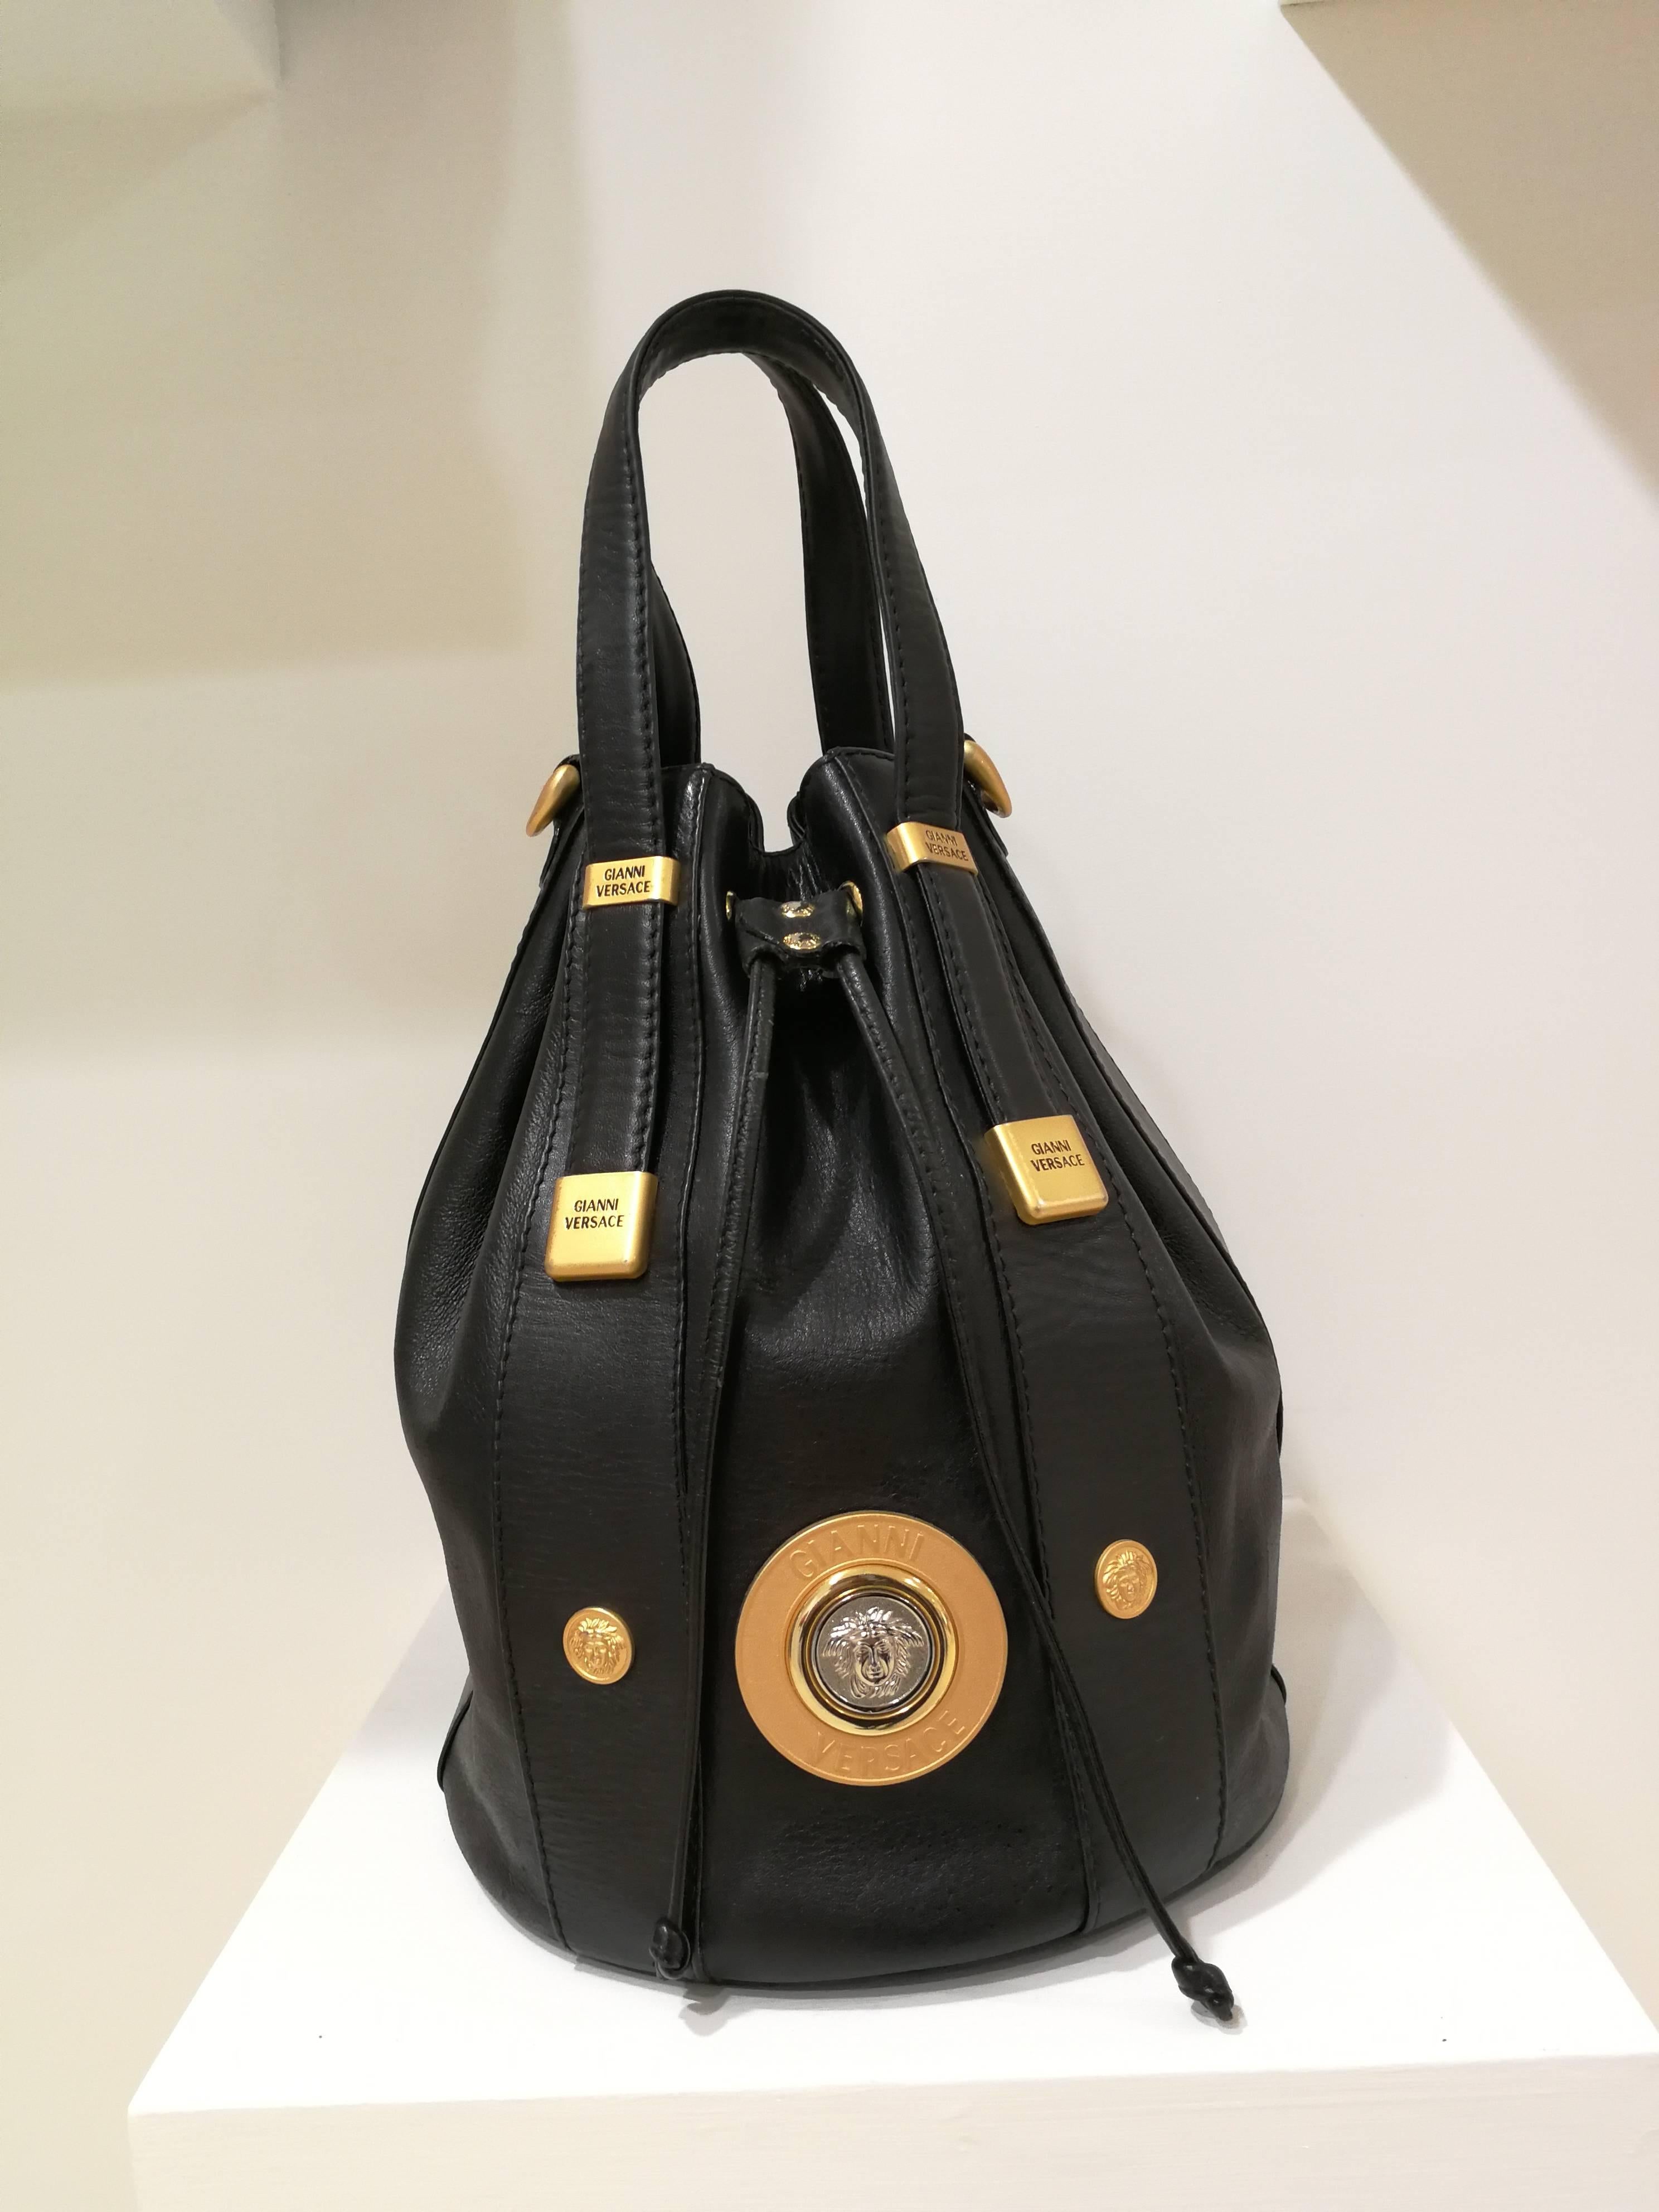 Women's or Men's Gianni Versace Black leather Gold and Silver Tone Studs Satchel - Shoulder Bag